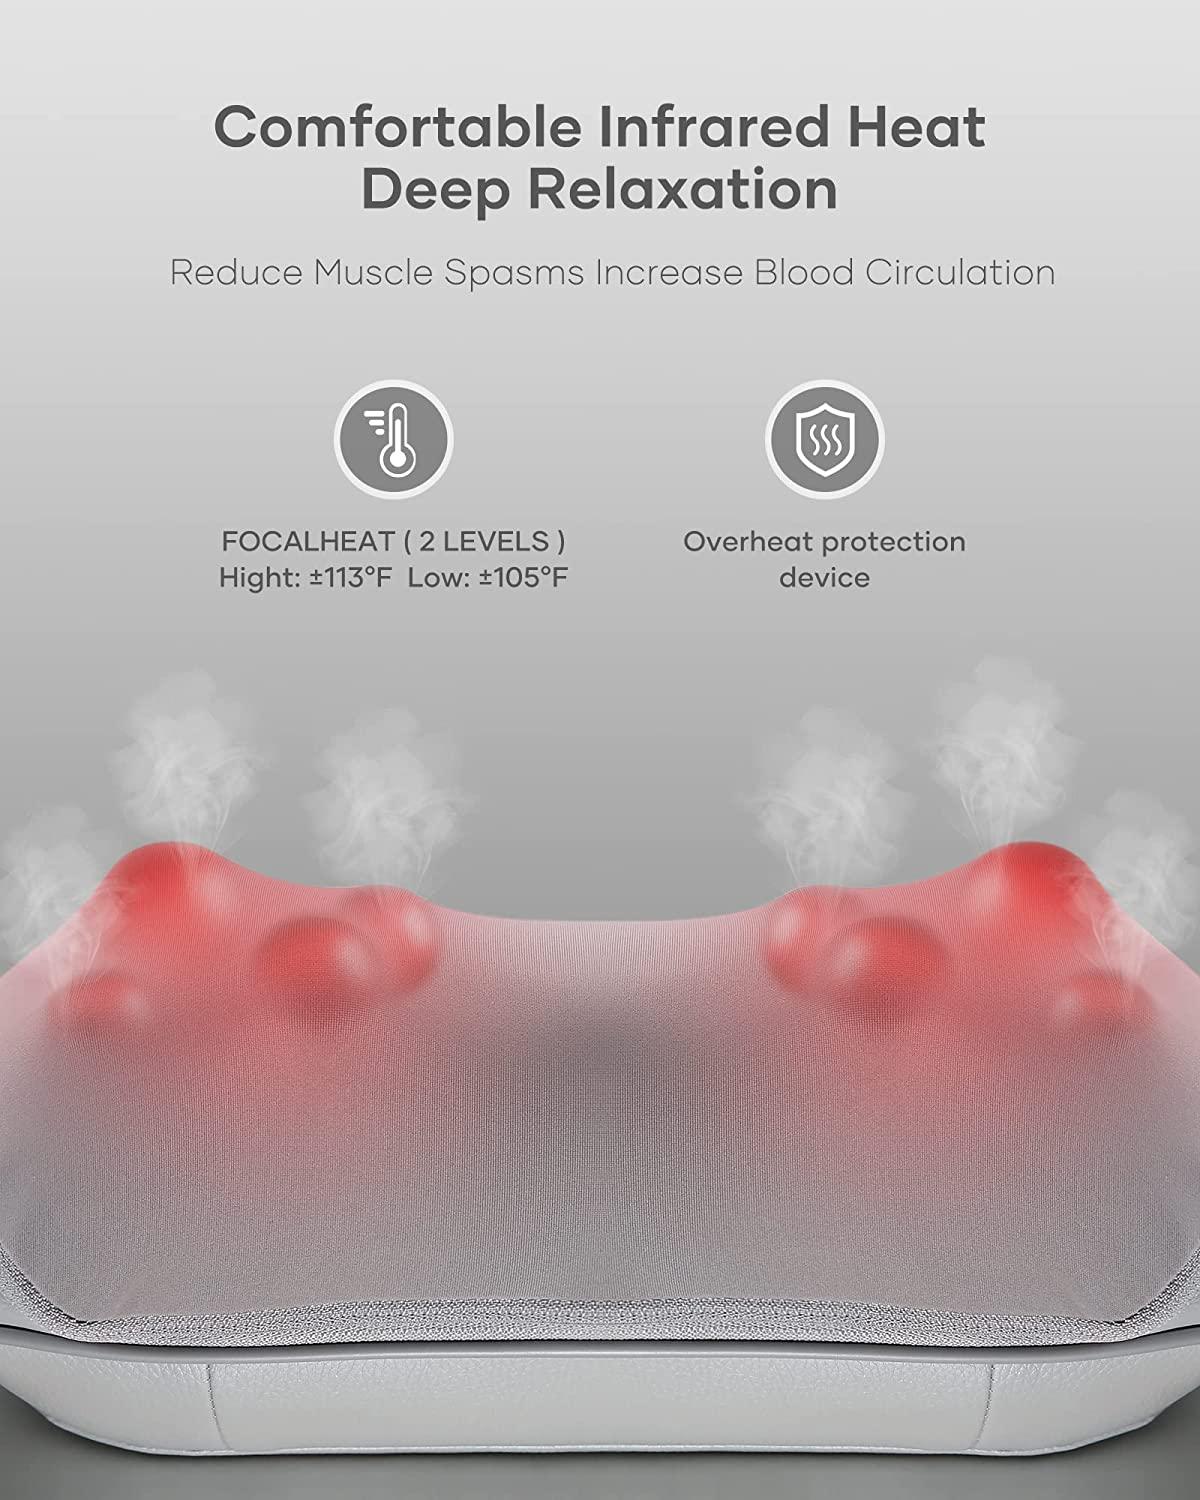 Naipo Back and Neck Massager with Heat, 8 Nodes 3D Deep Tissue Kneading  Massage for Shoulder Soreness Relief Women Men Christmas Gift